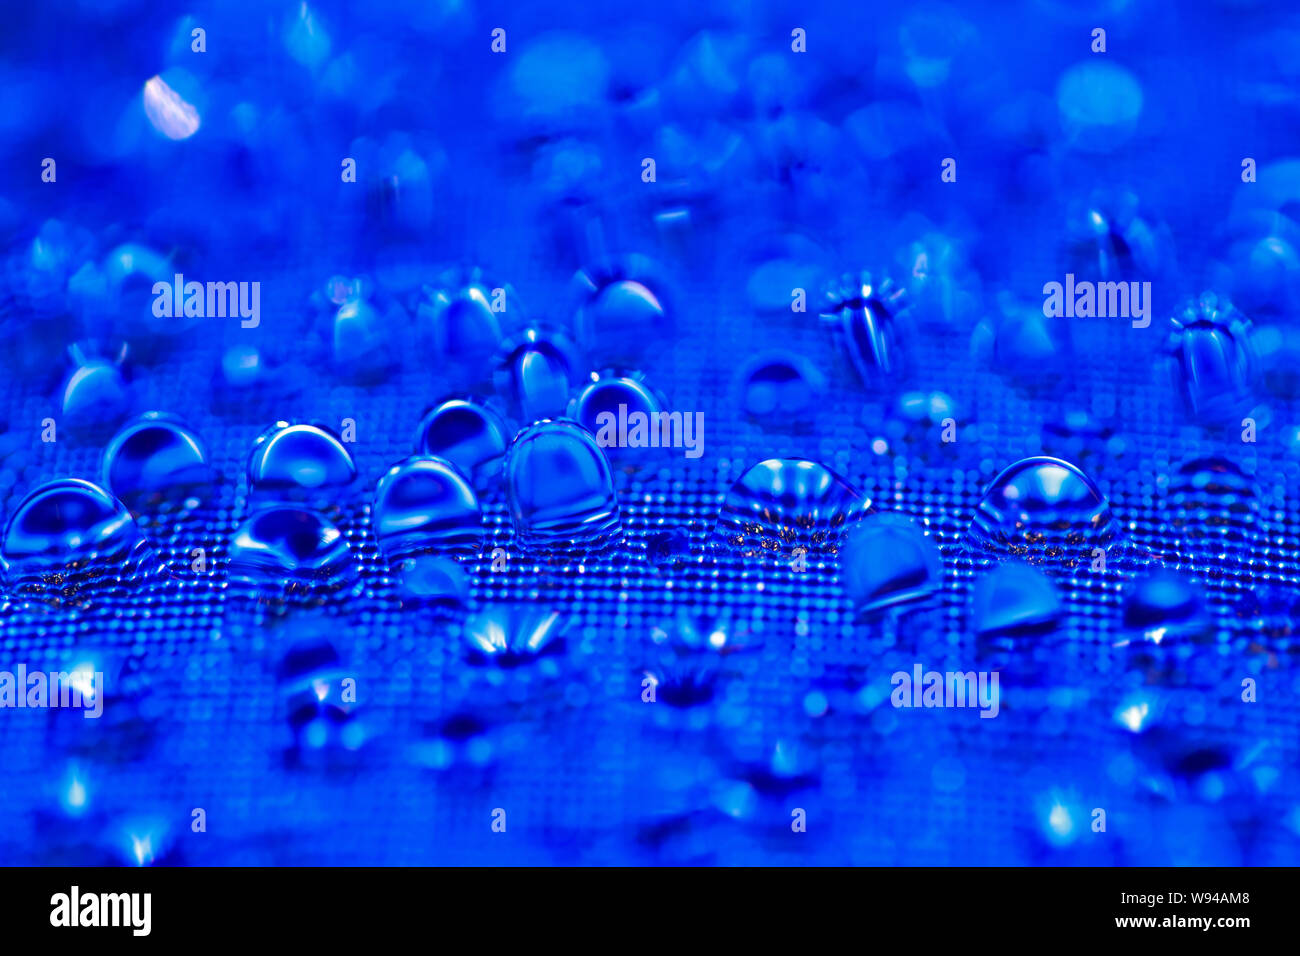 Water drops on the blue textured surface Stock Photo